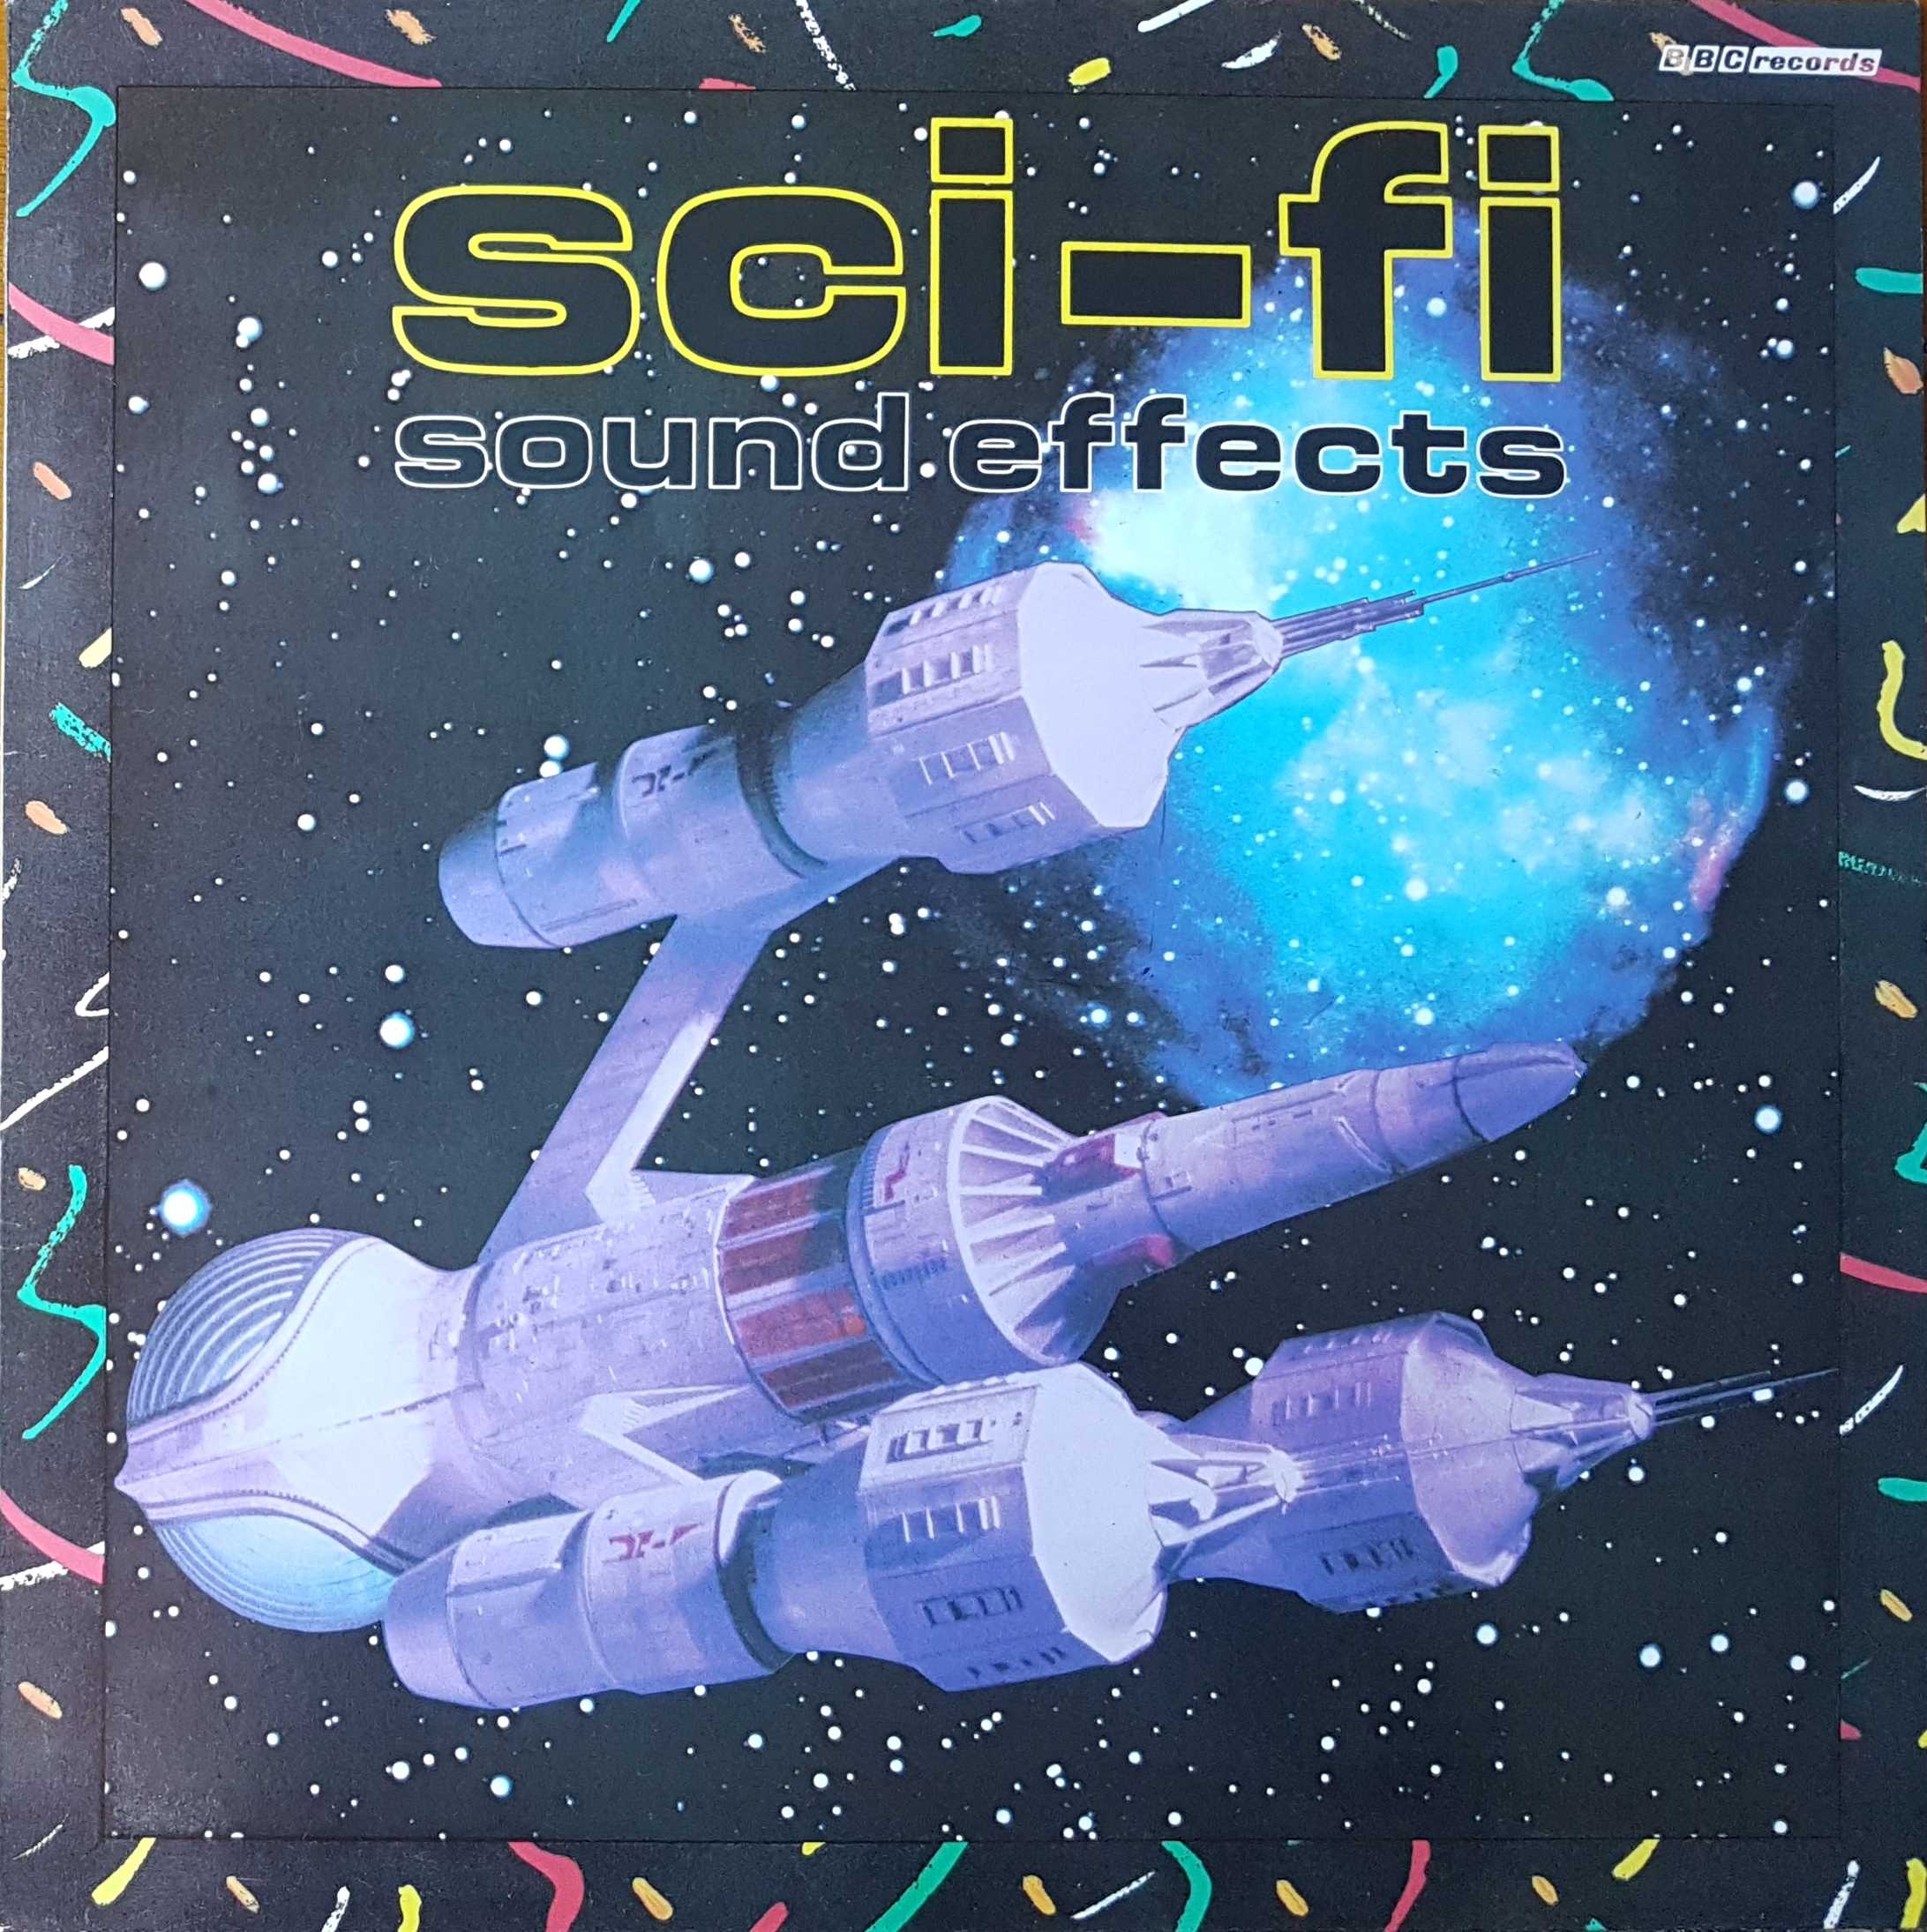 Picture of REC 420 Science fiction sound effects by artist Various from the BBC albums - Records and Tapes library